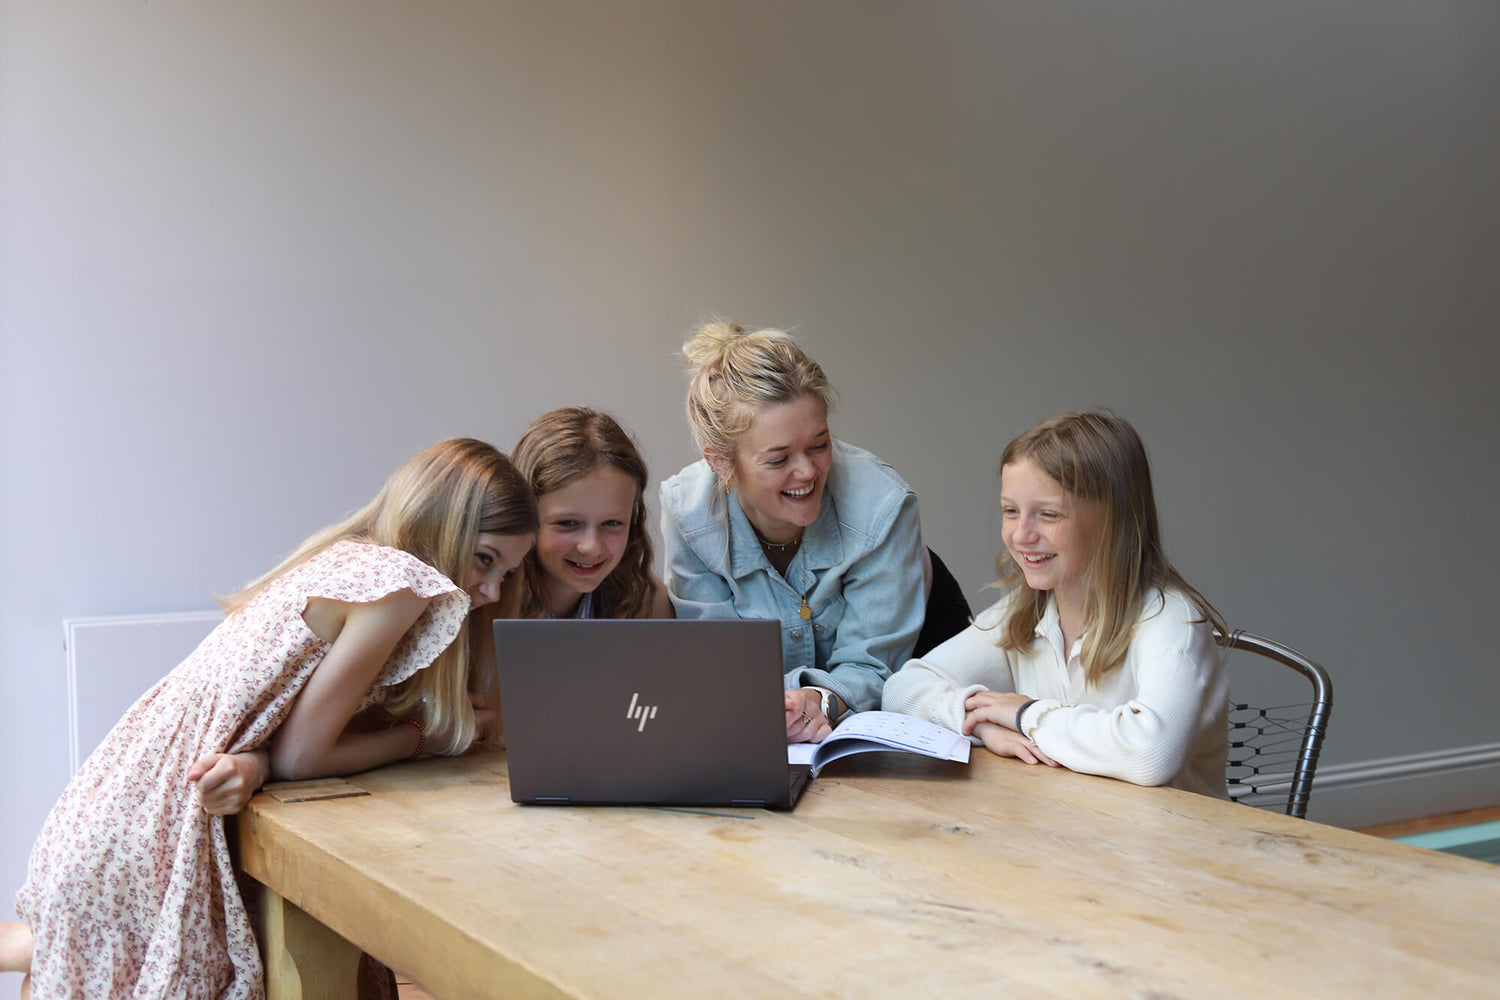 Phoebe and 3 young girls working from a textbook with a laptop